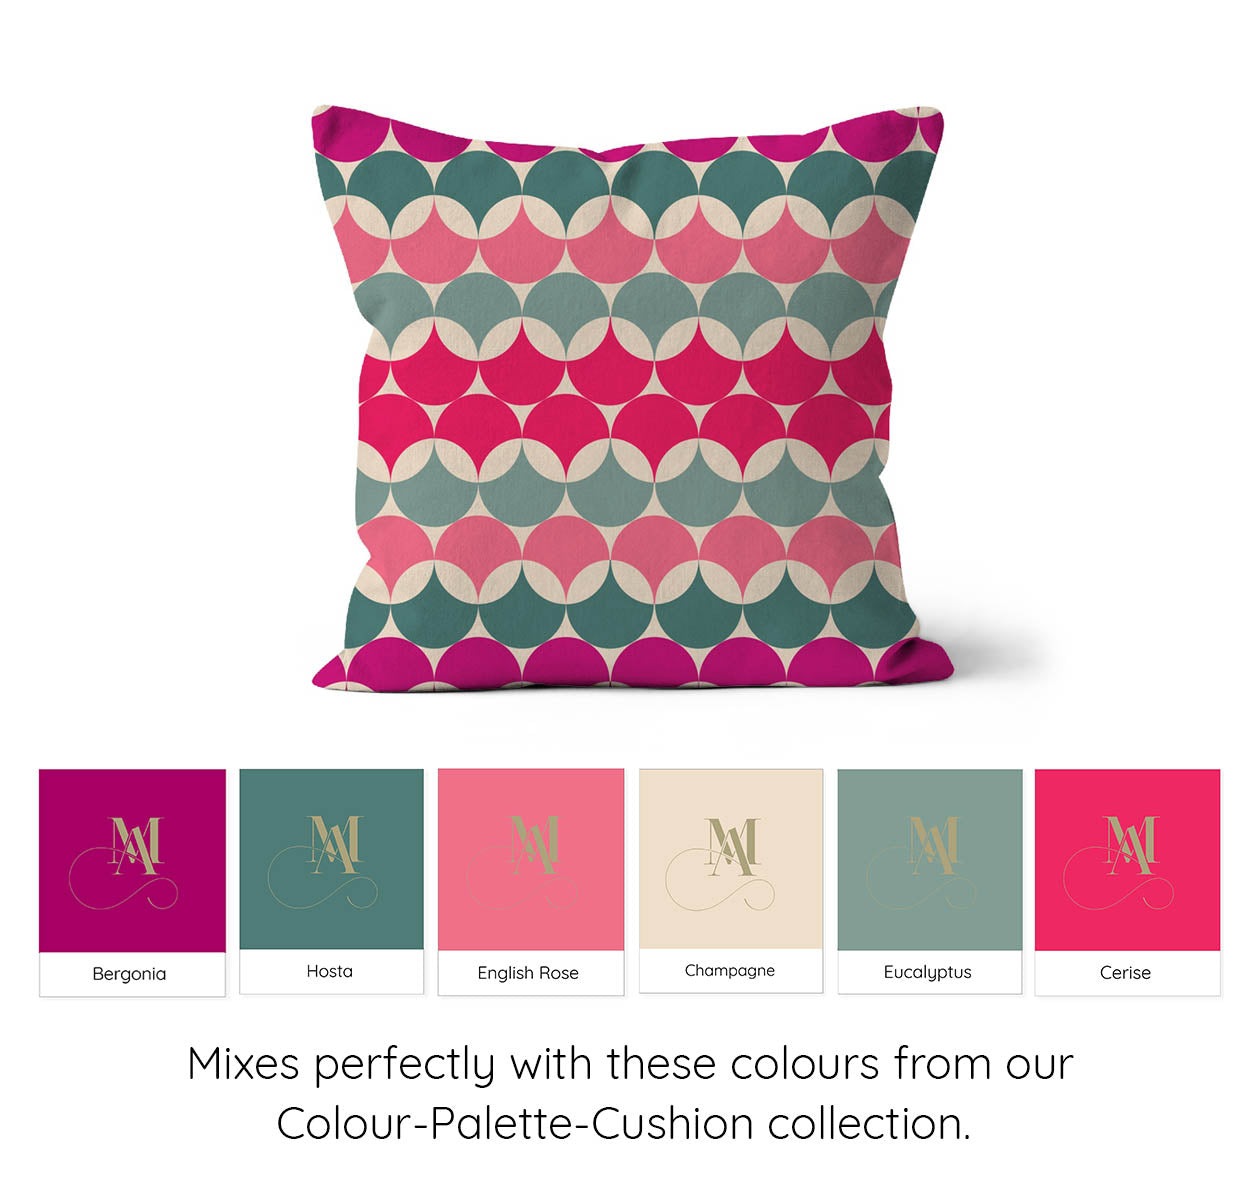 Square shaped cushion with Bauhaus style graphic pattern in teal green, greys and bright pink and soft pink colour circles combination. 6 Colour swatches showing all the colours in the pattern.